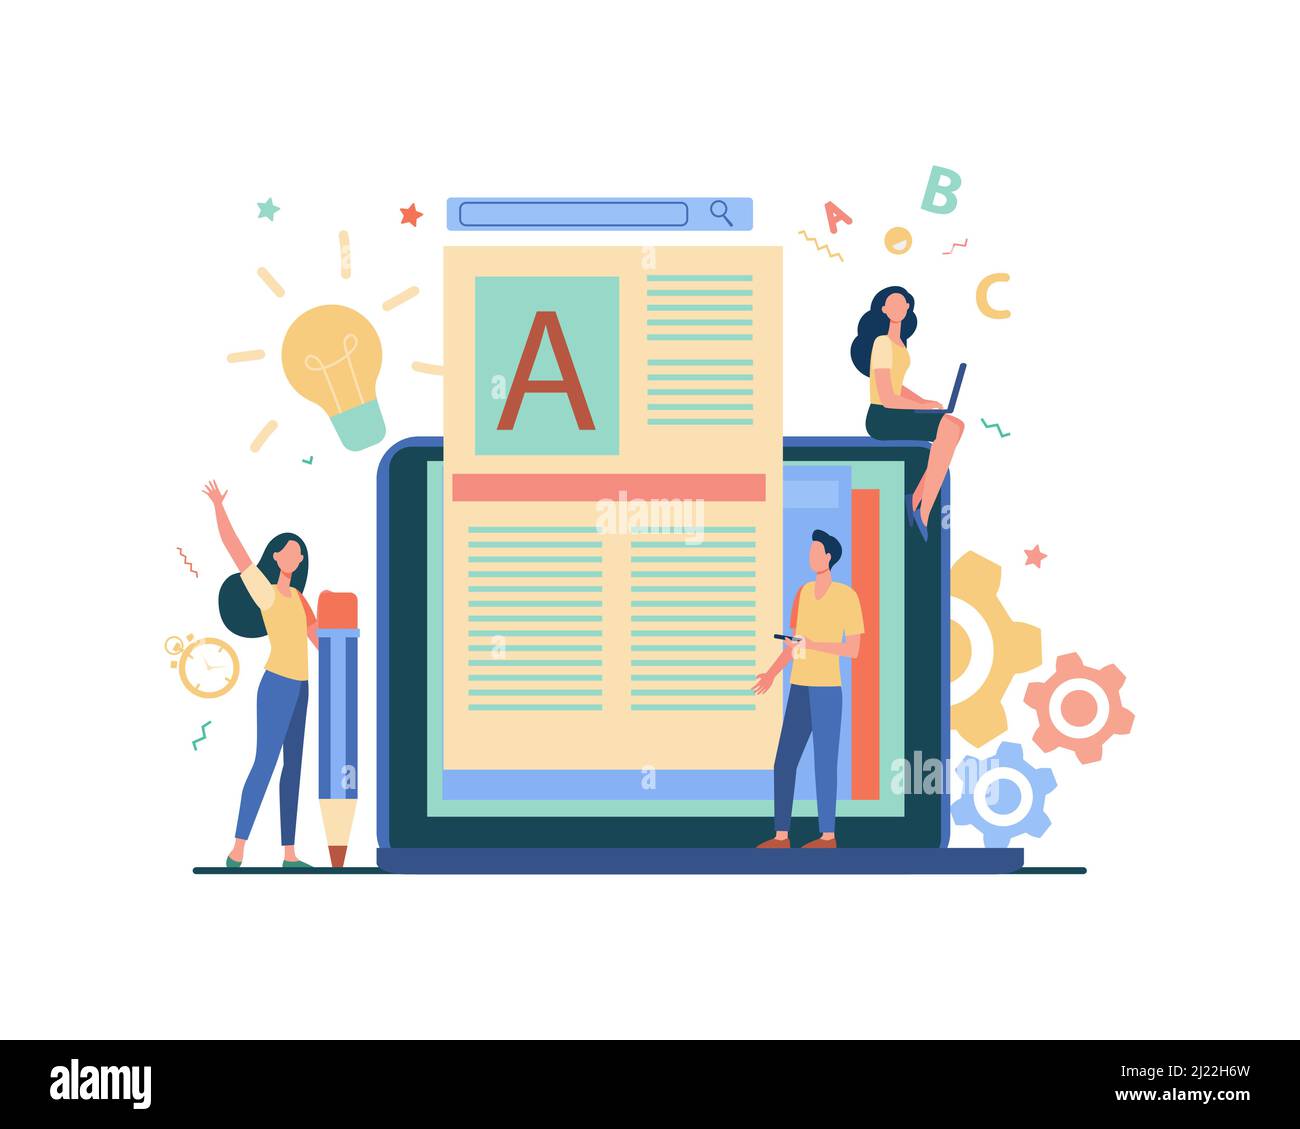 Content author or writer job concept. Freelance blogger at laptop writing creative article, editing text. Vector illustration for blogging, seo market Stock Vector